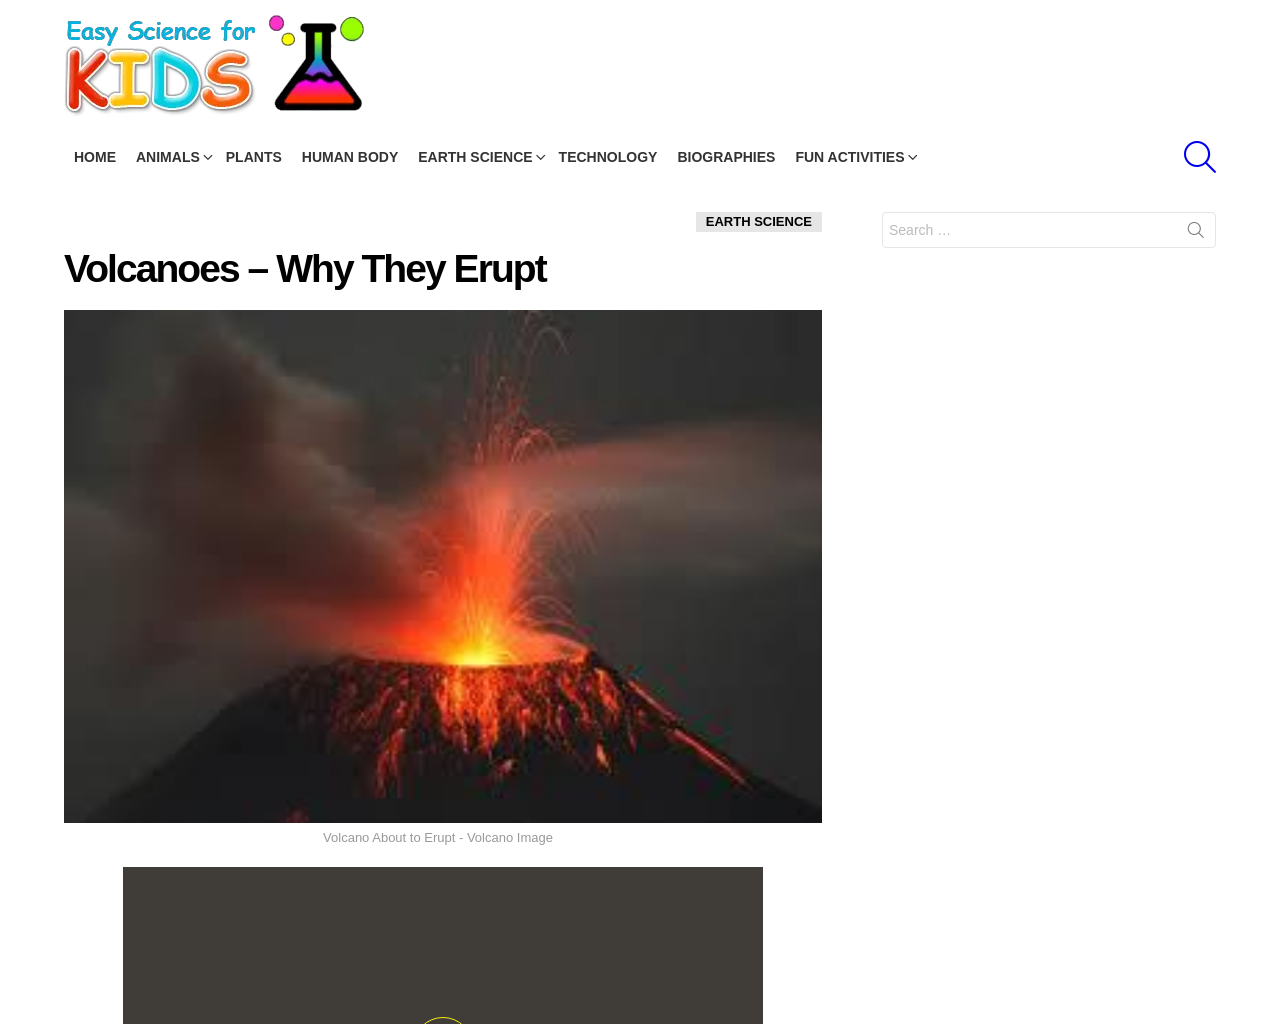 Learn about Volcanoes